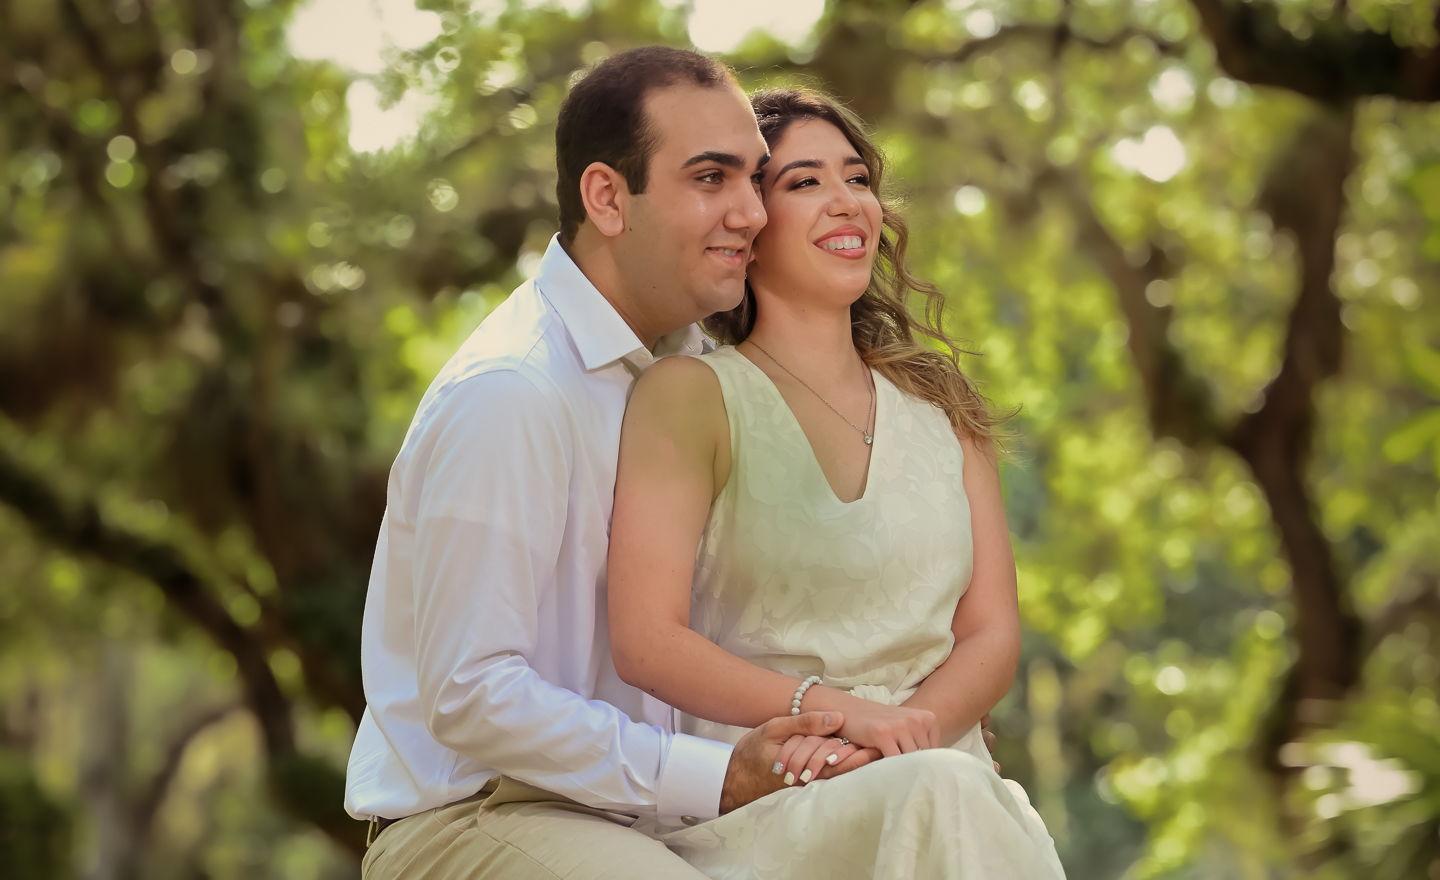 The Wedding Website of Isaac Rodriguez and Laura Millo